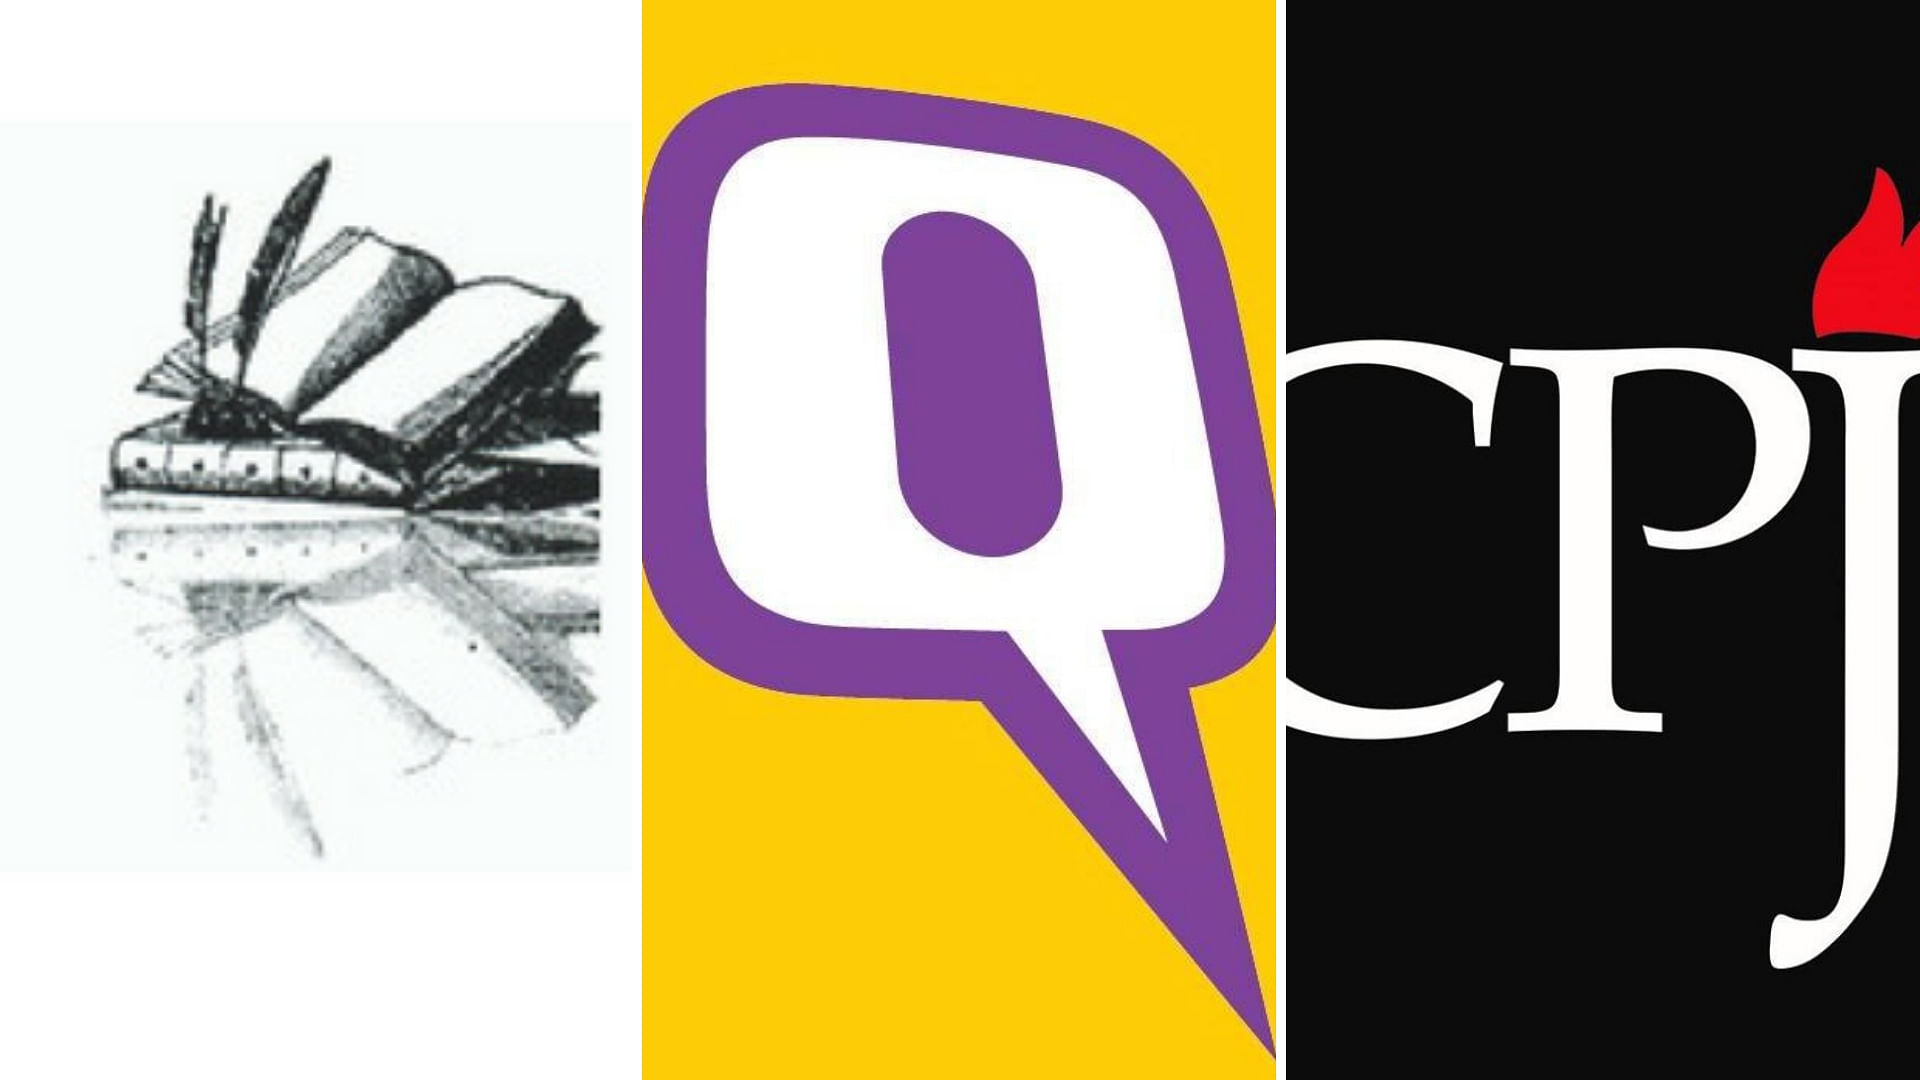 Editors Guild of India and CPJ Asia have expressed concern over the I-T raids at <b>The Quint</b>’s premises.